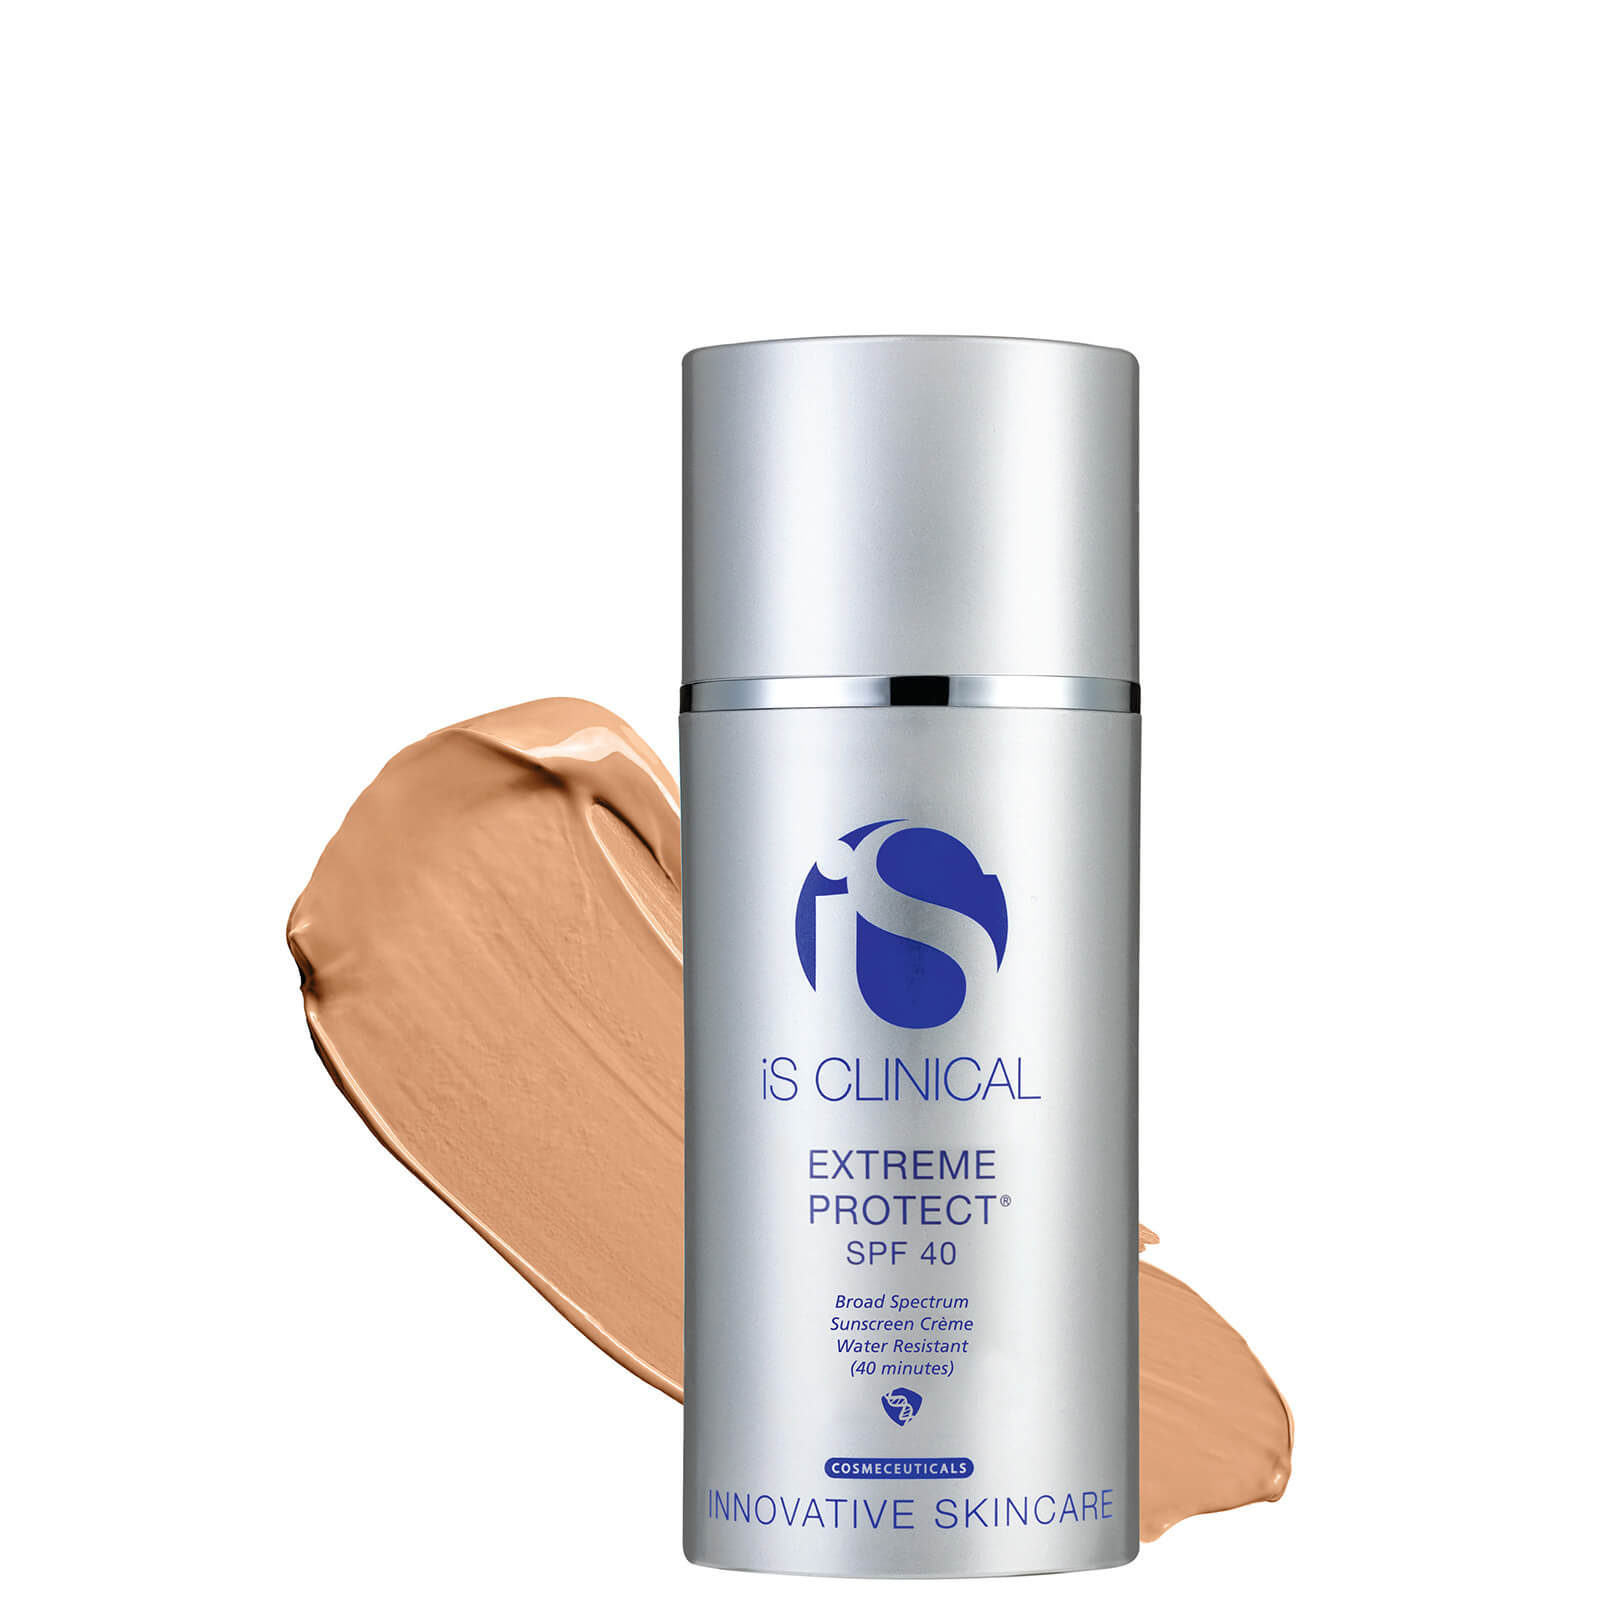 IS CLINICAL EXTREME PROTECT SPF 40 PERFECTINT BRONZE,13541